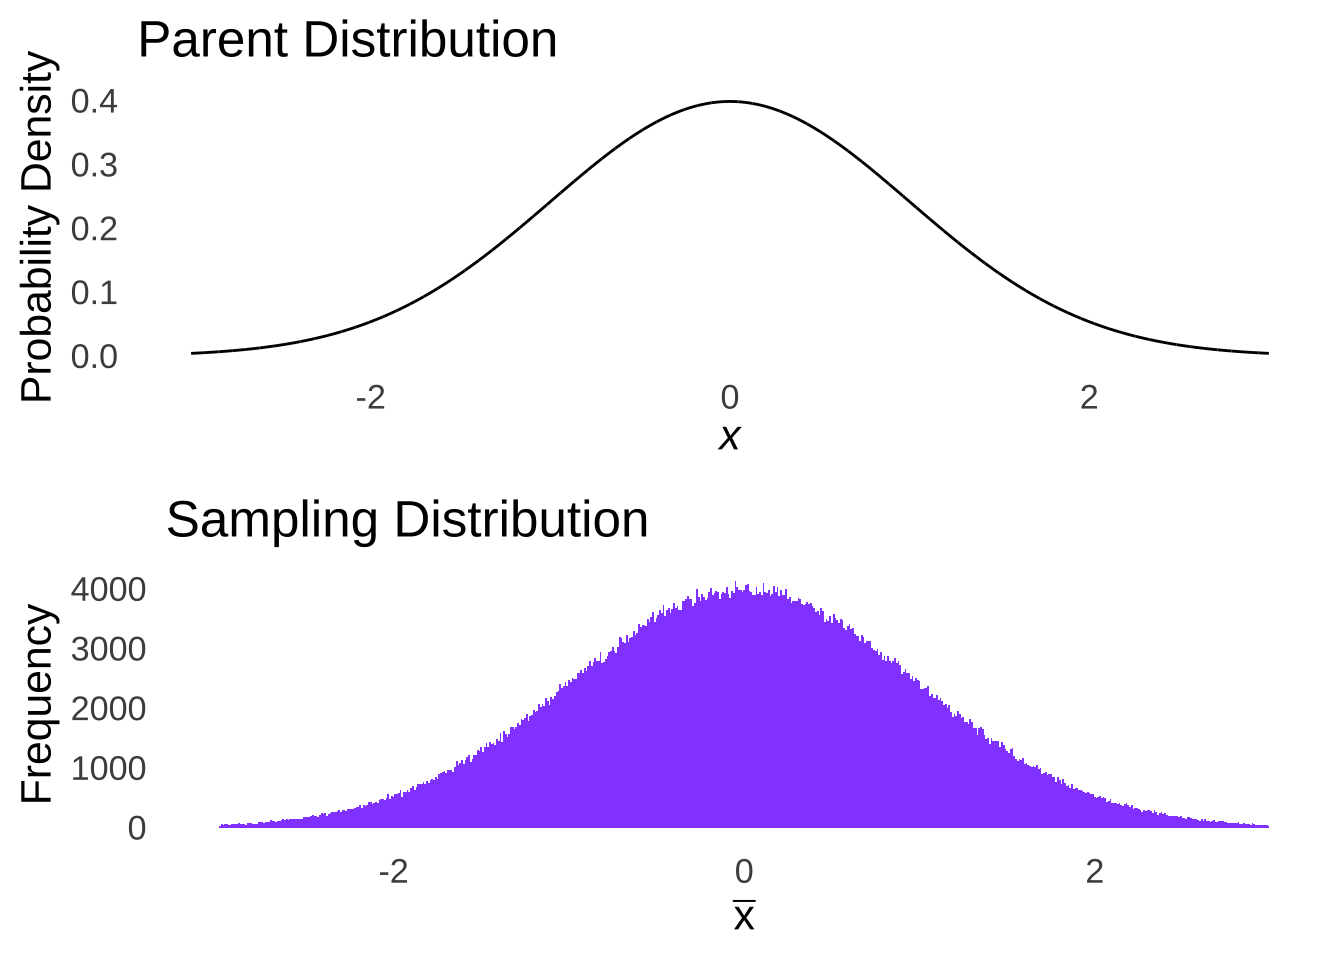 Normal Parent Distribution and Sampling Distribution with $n=1$